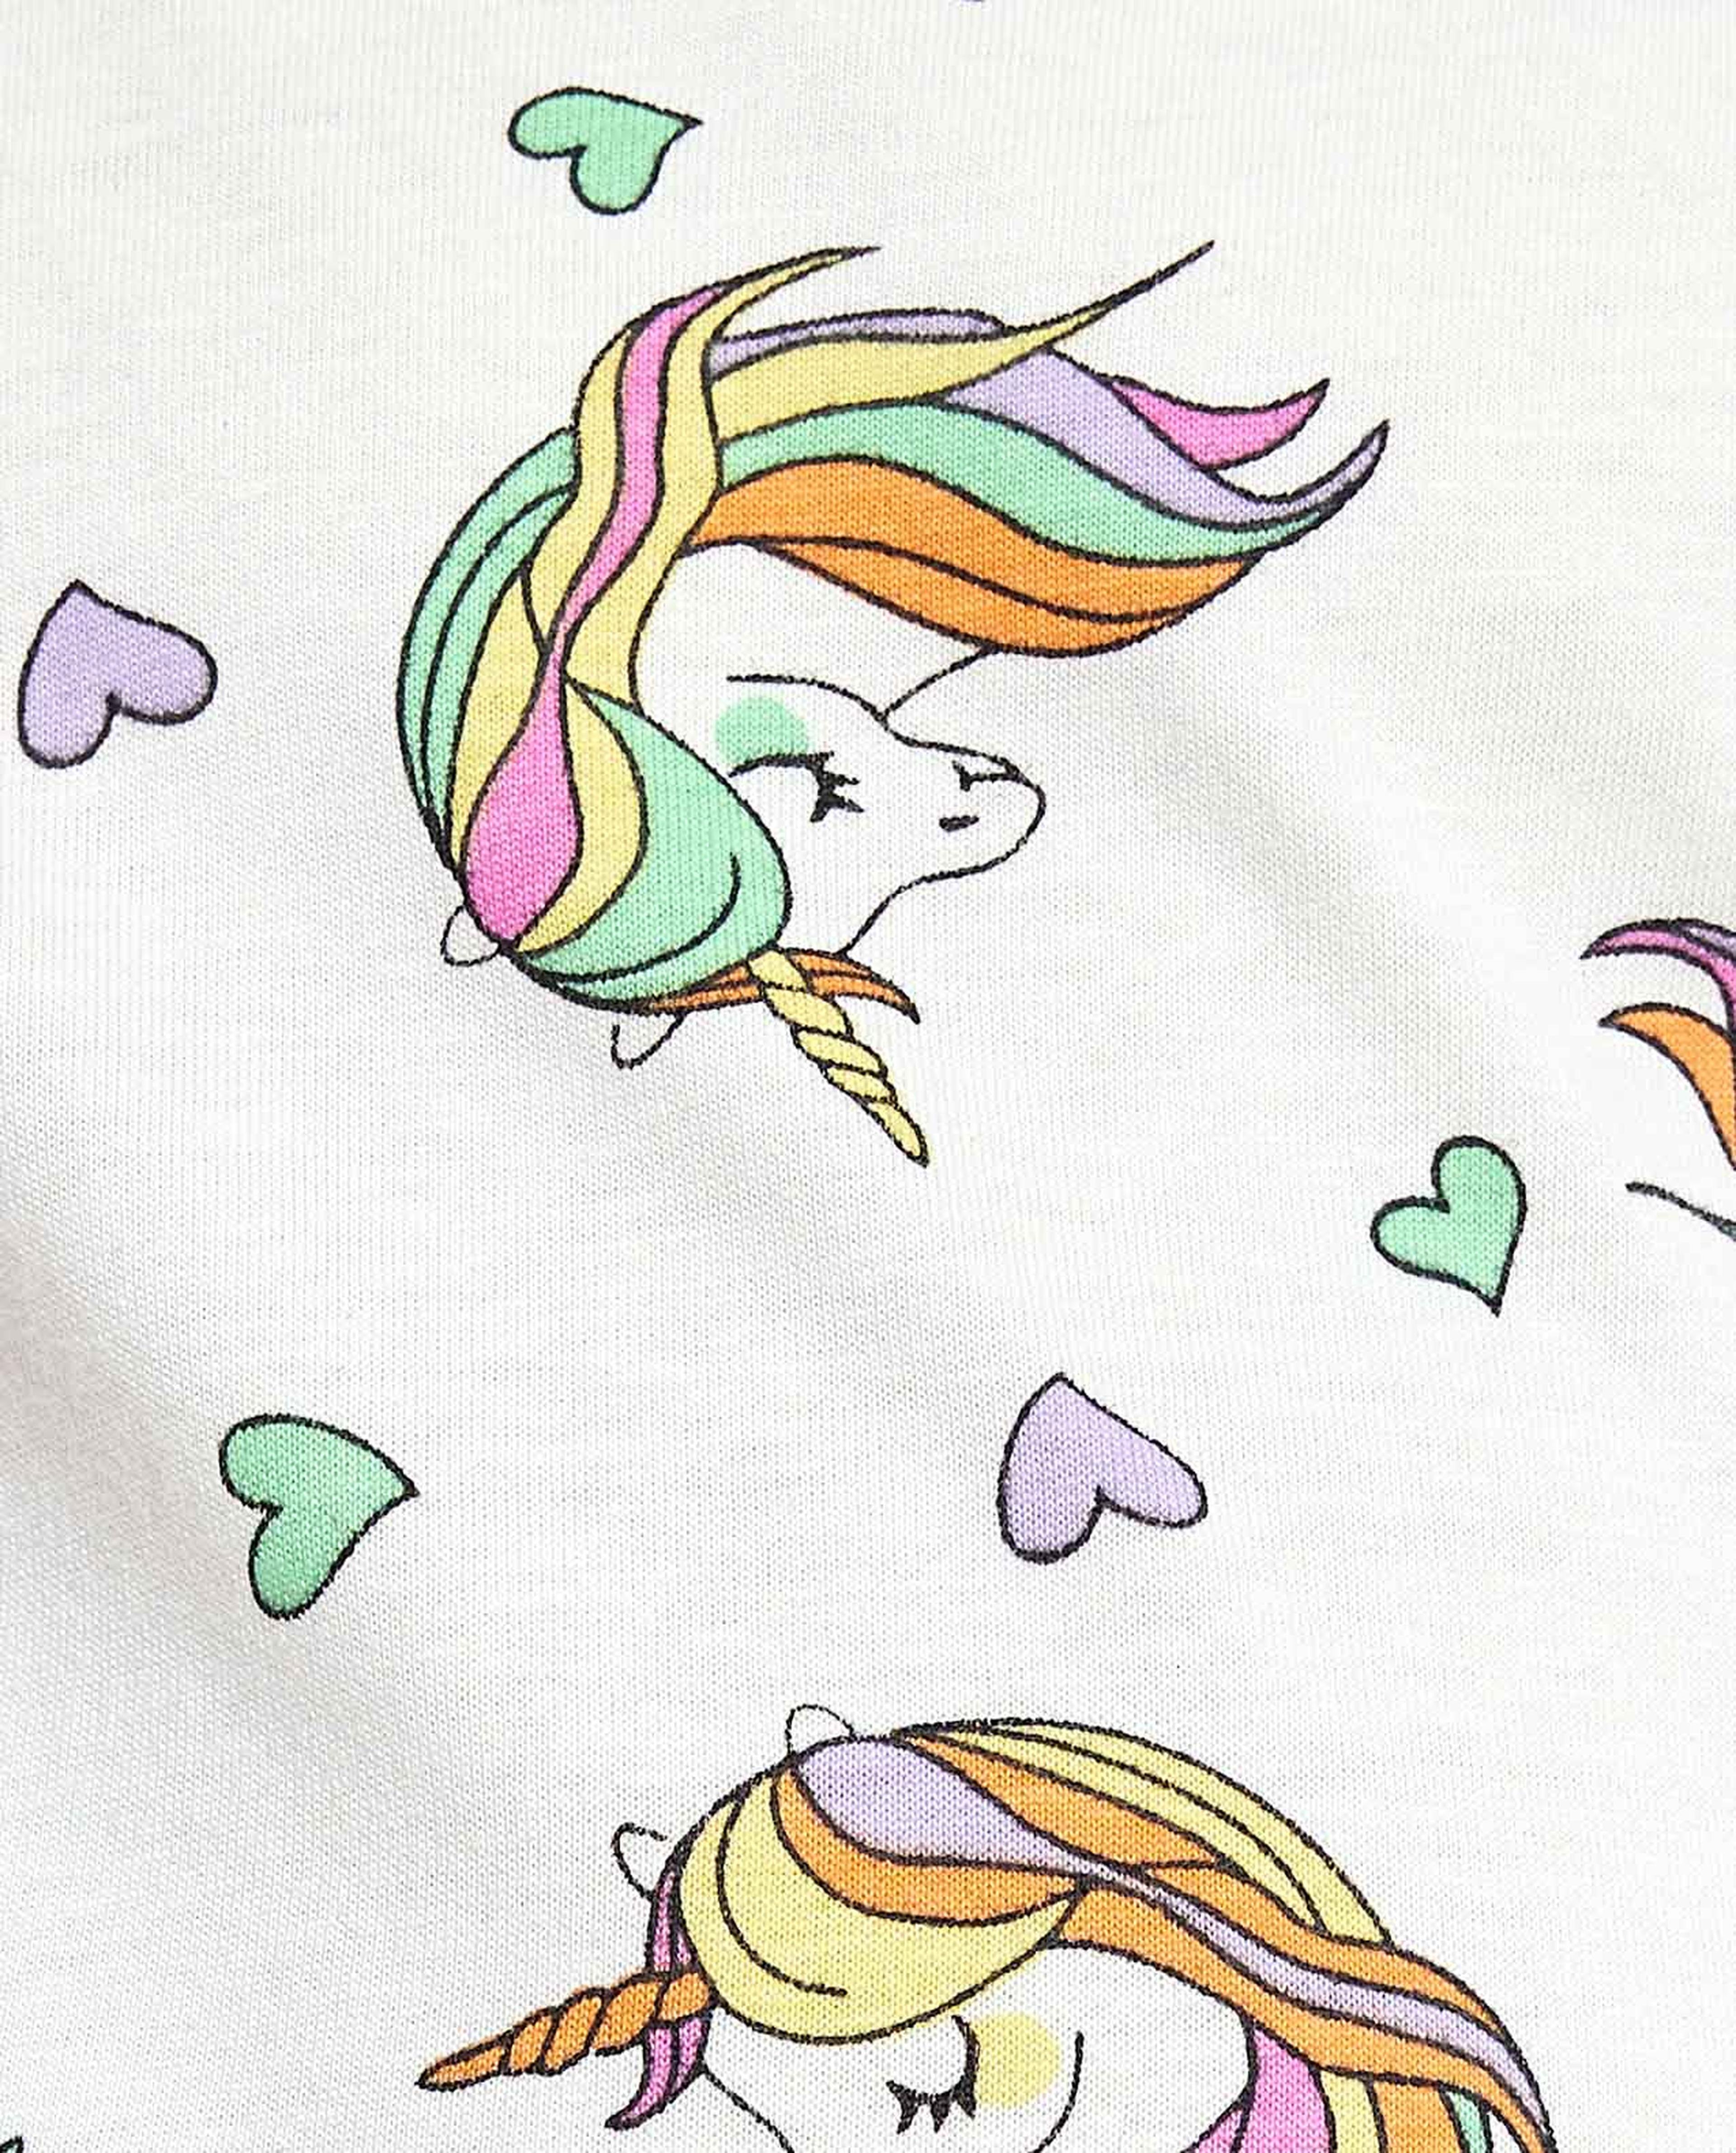 Unicorn Print Fit and Flare Dress with Flutter Sleeves